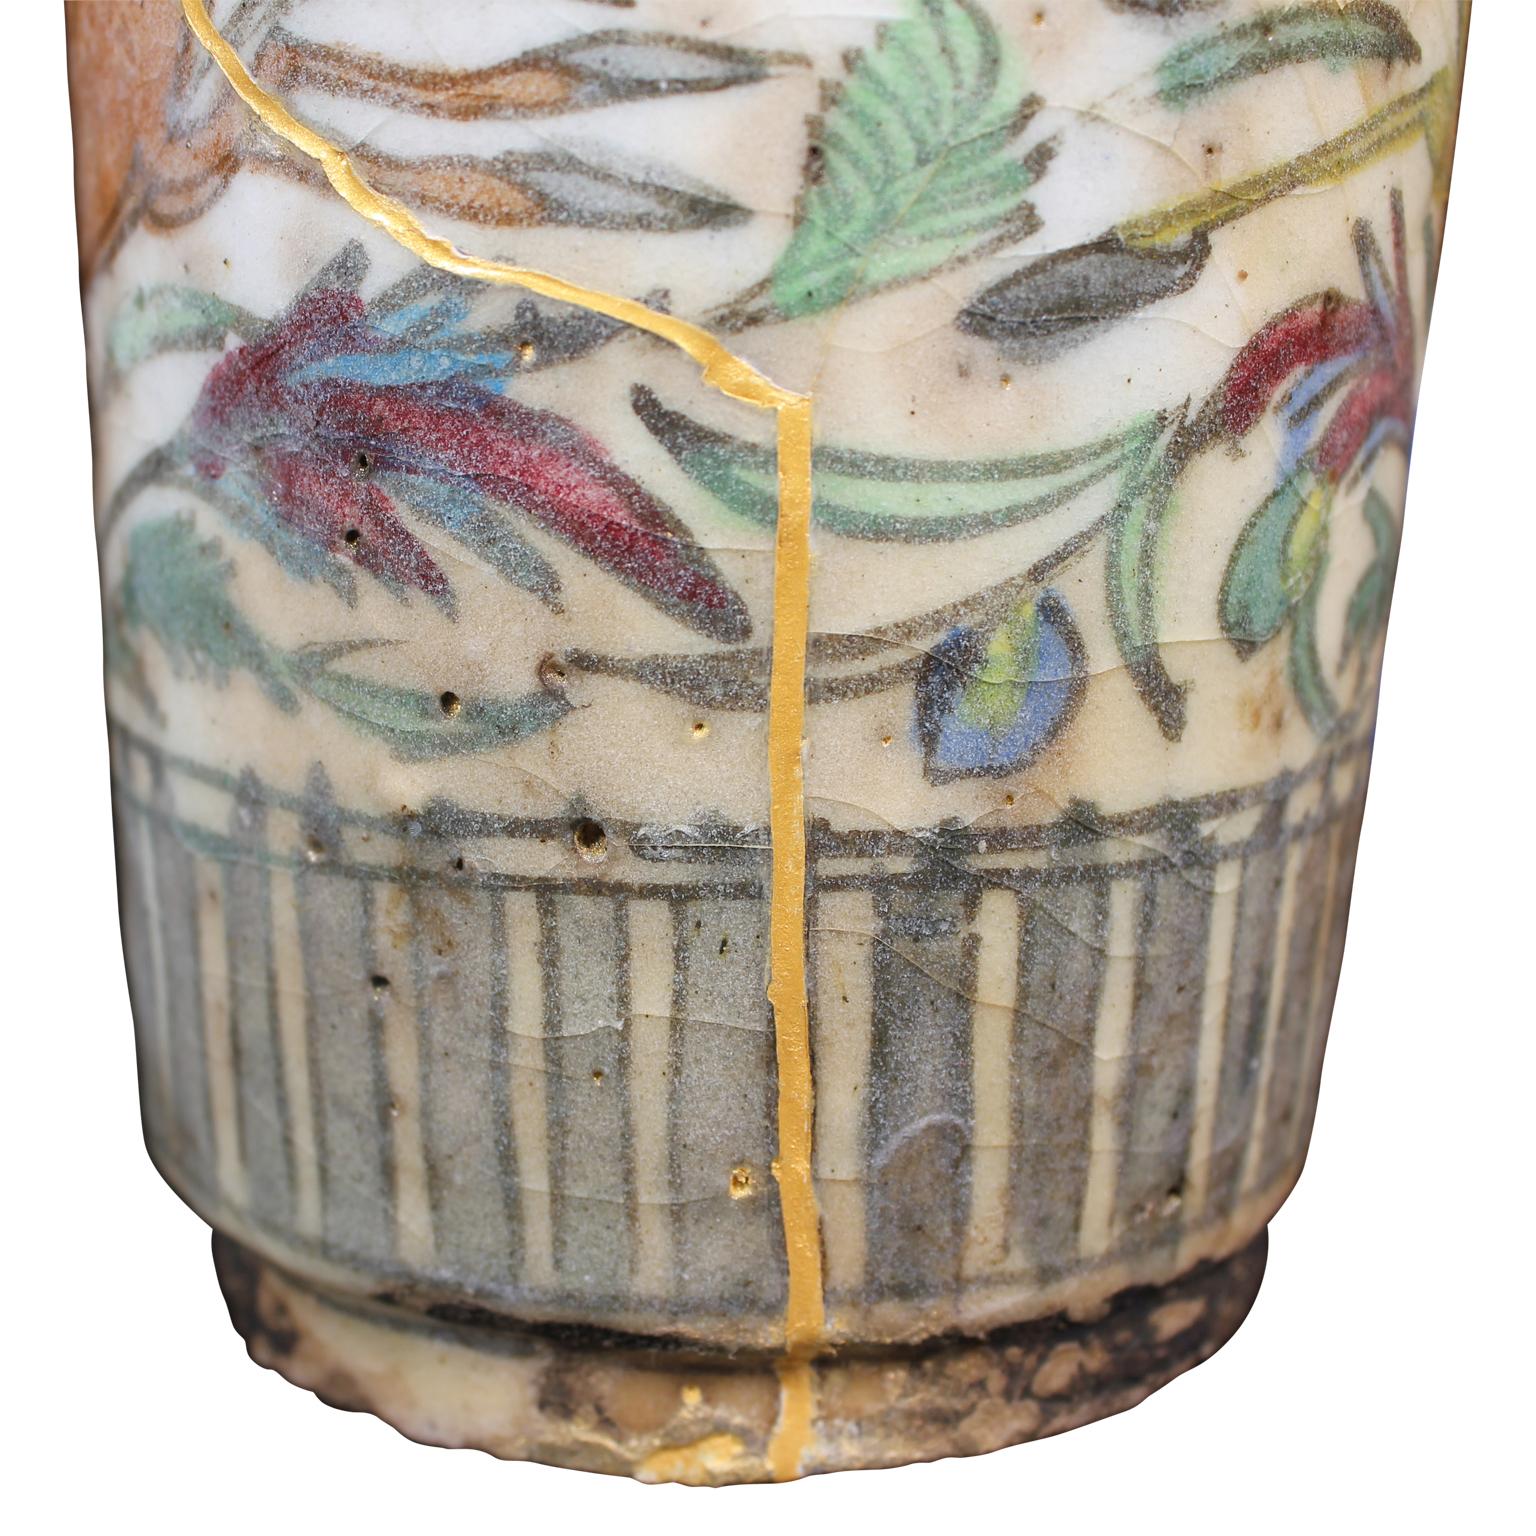 18th Century and Earlier 17th Century Persian Wine Bottle or Vase Repaired with Kintsugi Method